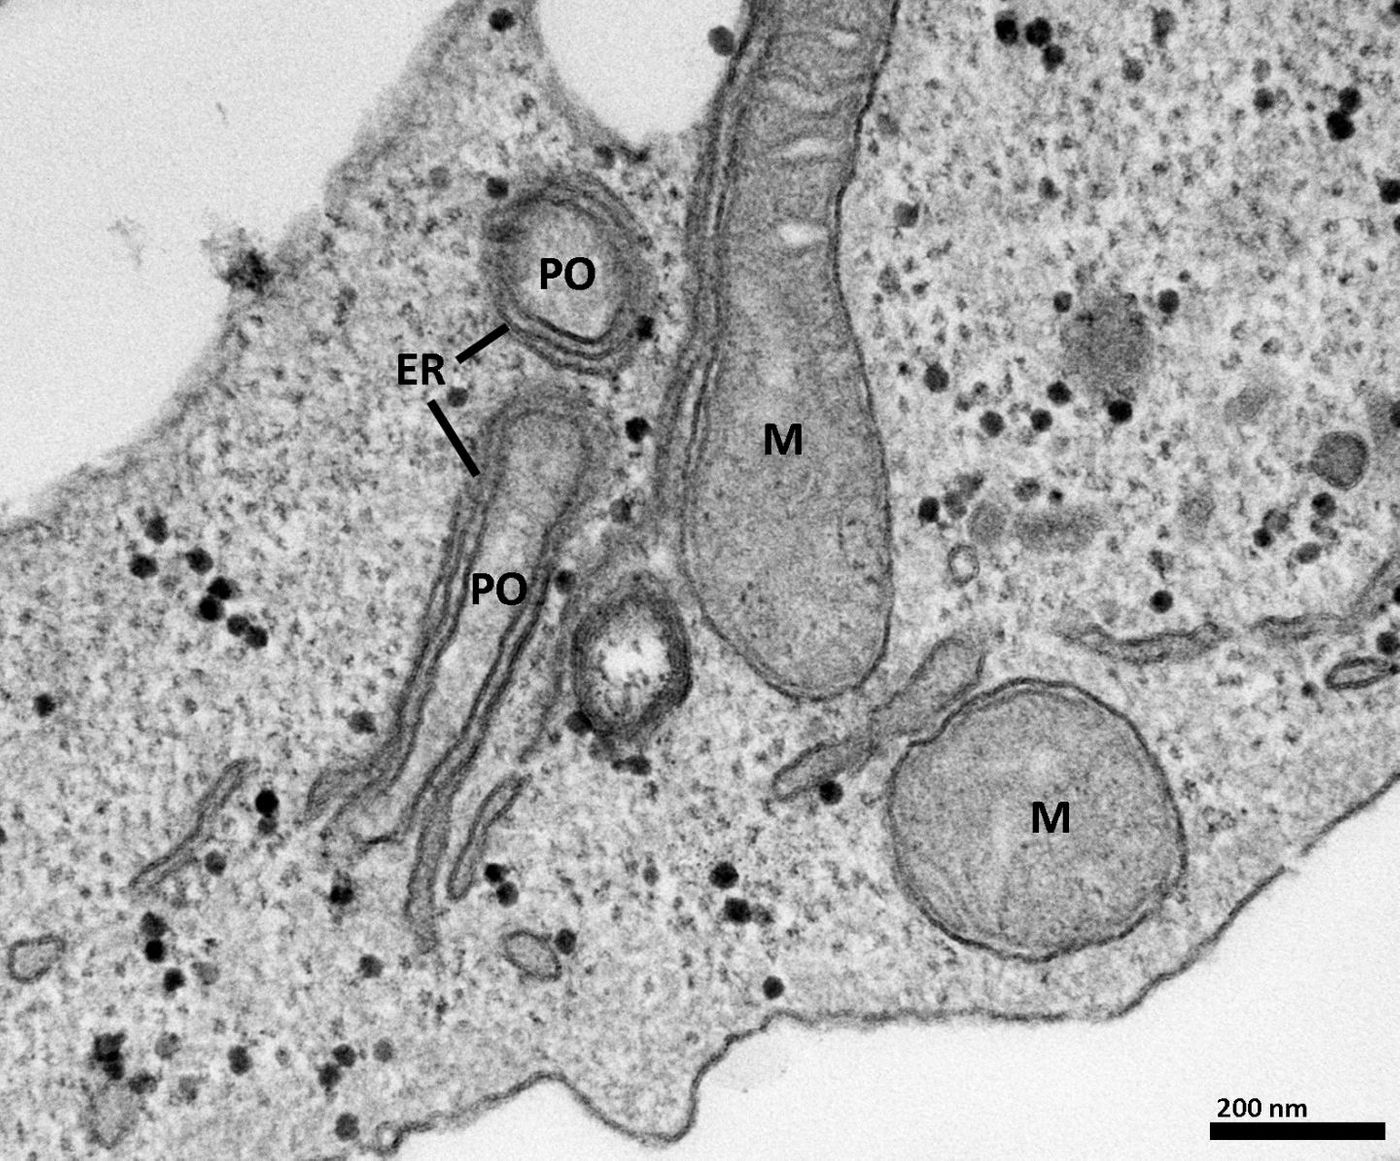 Close interaction of the endoplasmic reticulum (ER) with peroxisomes (PO) in cultured cells is shown by electron microscopy. M, mitochondria. / Credit: University of Exeter